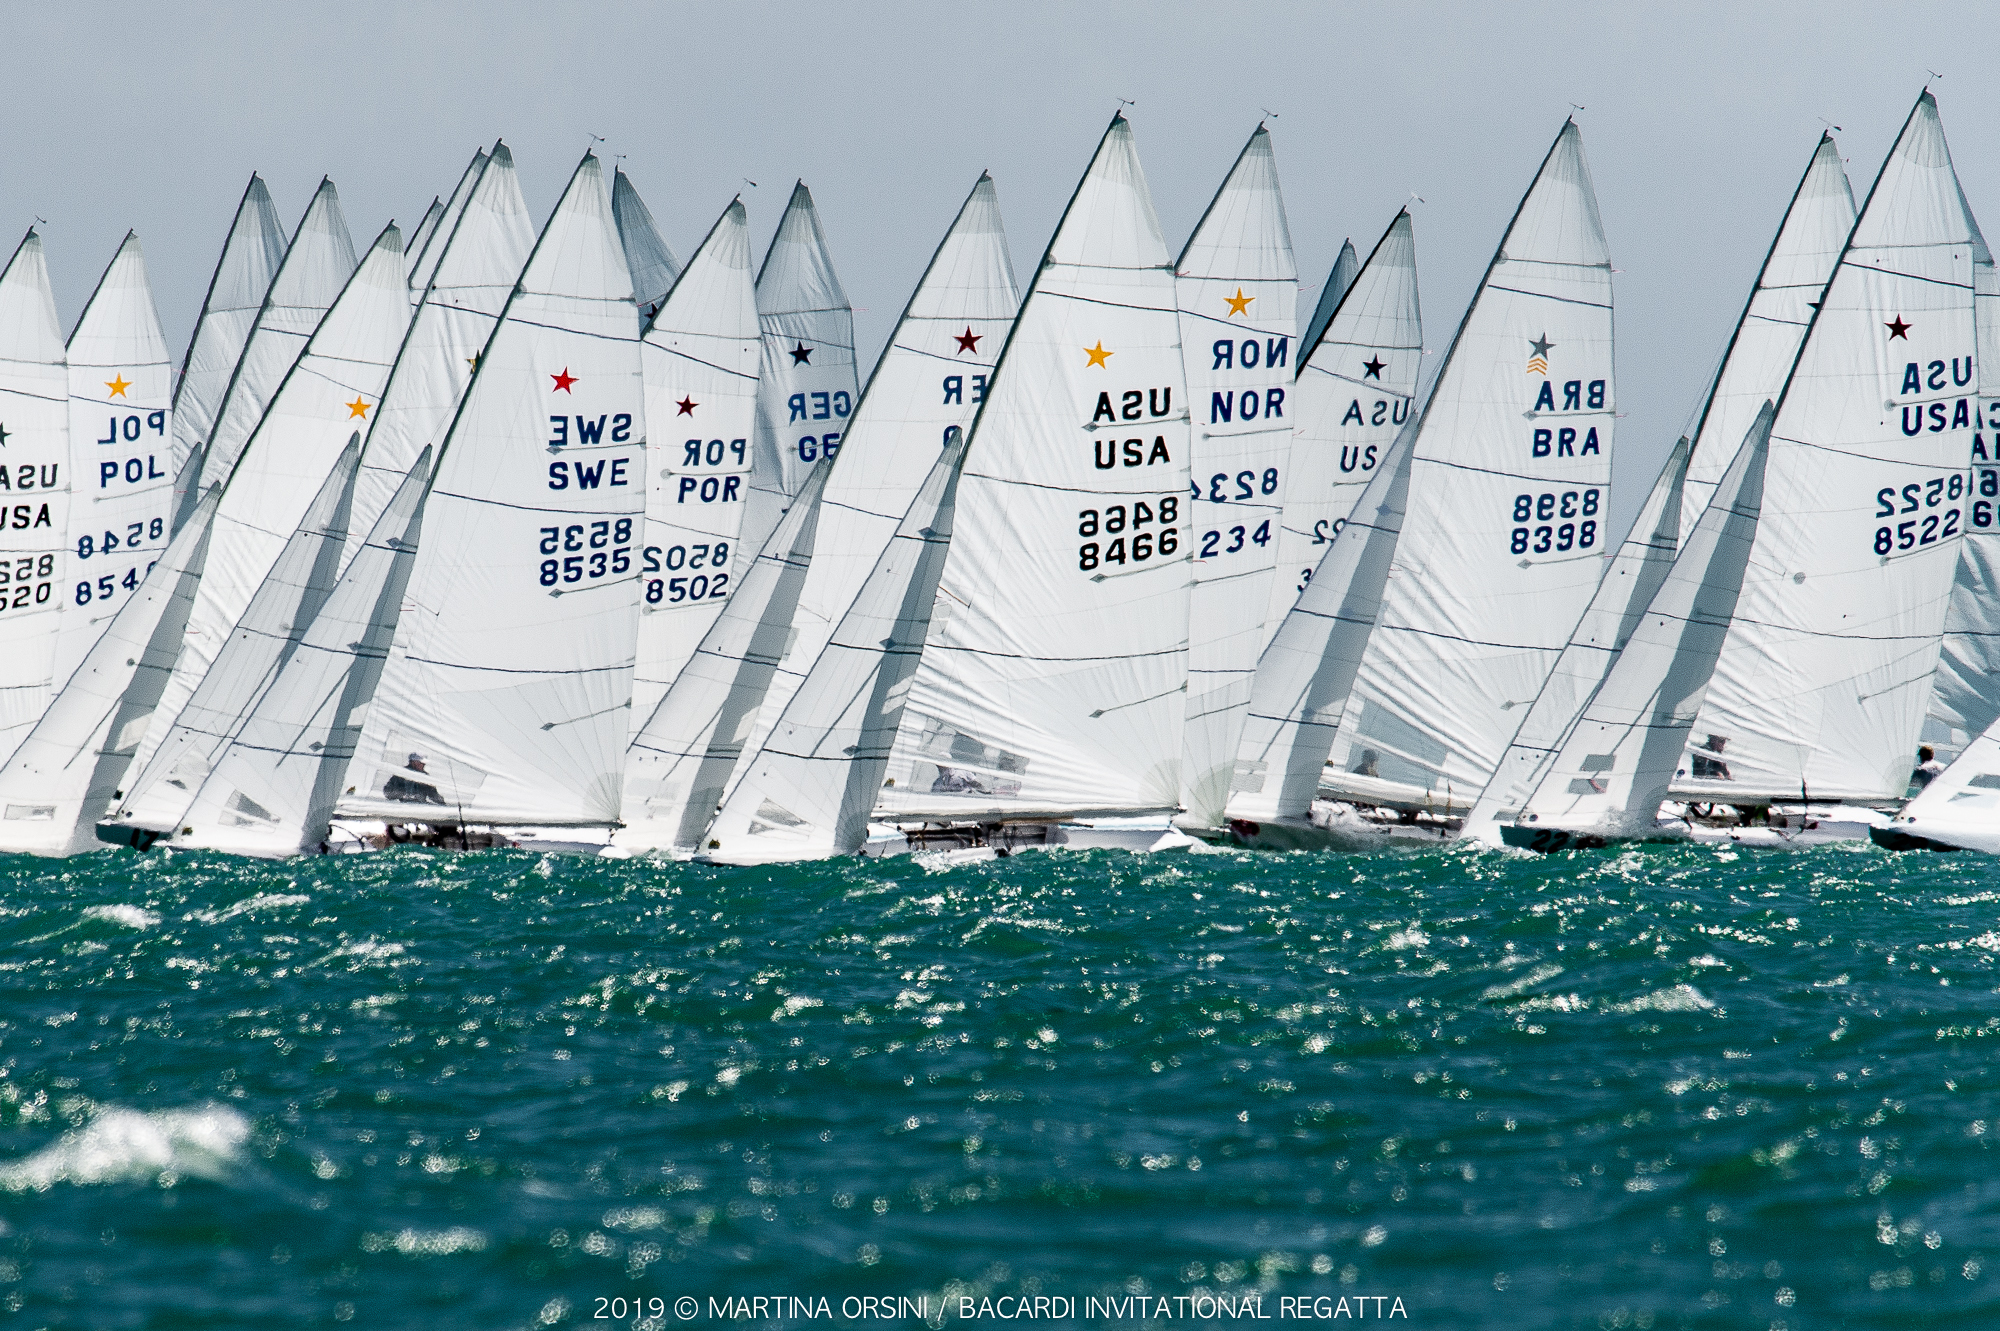  Star  Bacardi Cup  Miami FL, USA  First races today